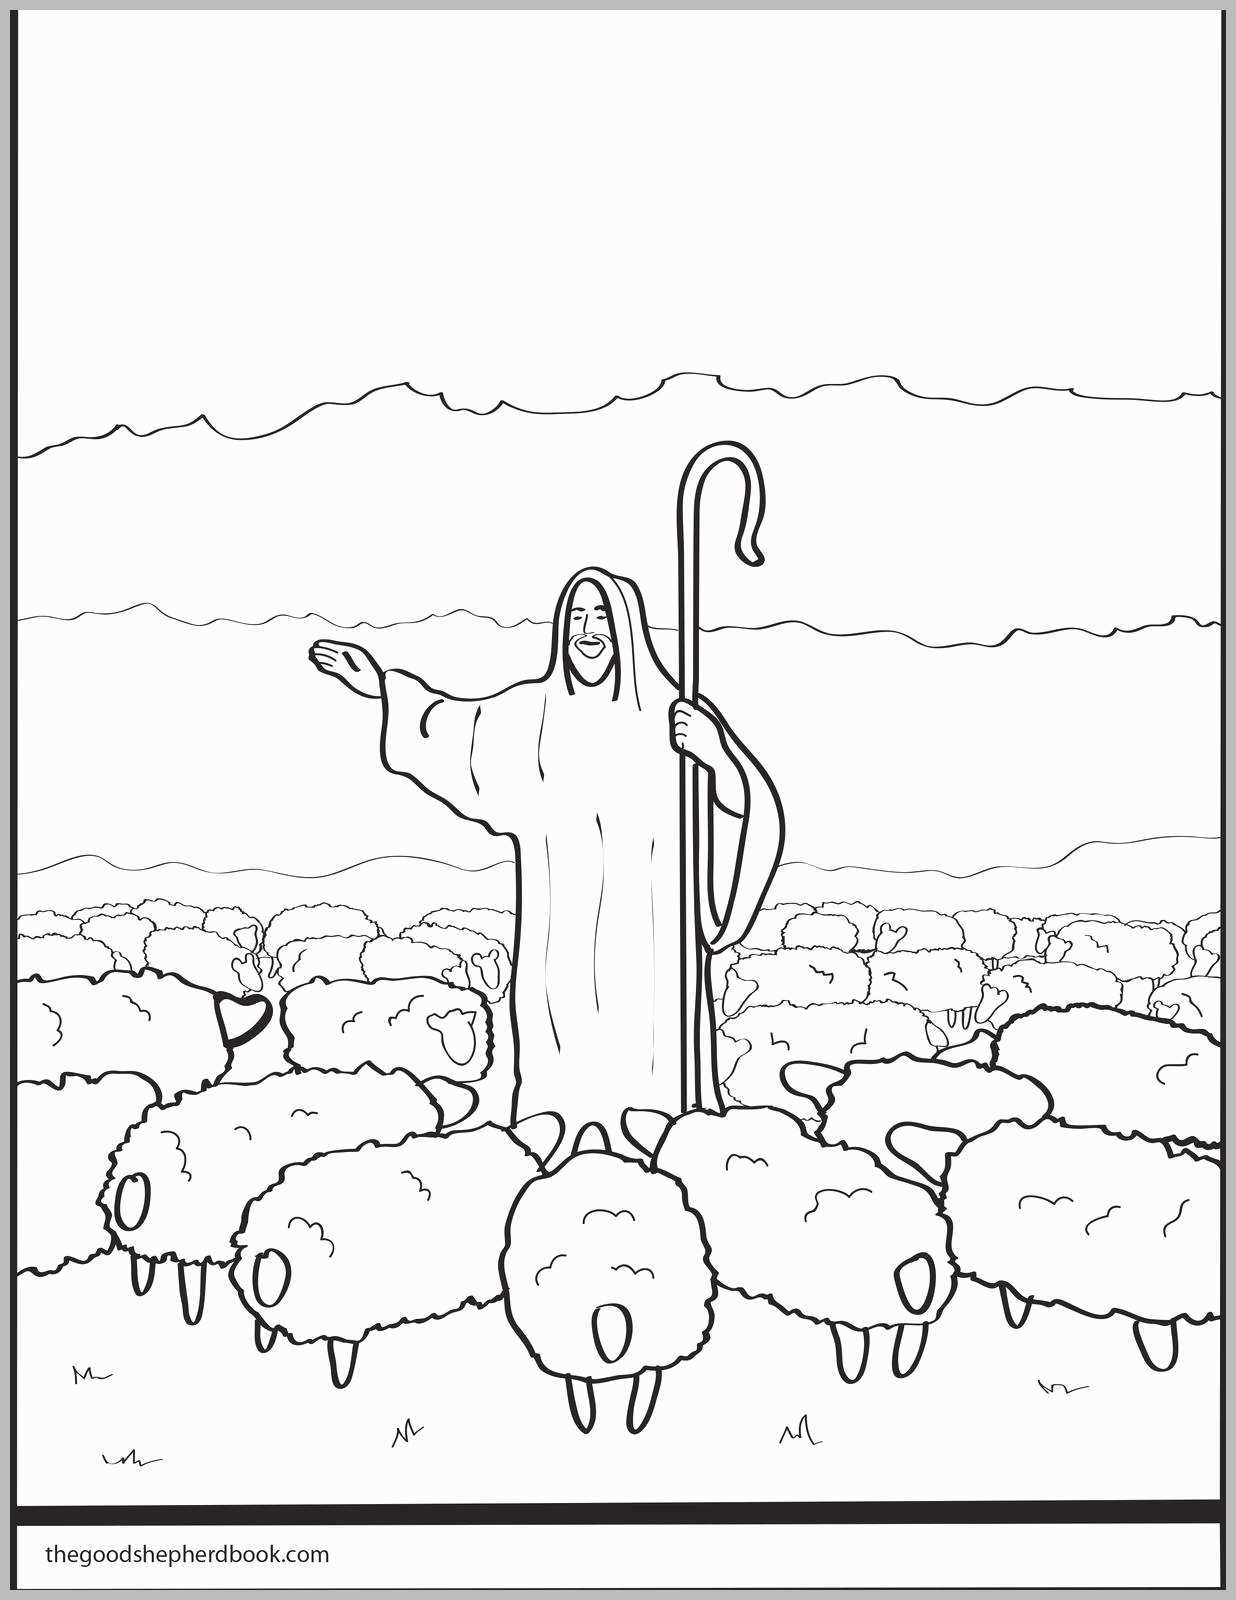 Coloring Pages Sheep And The Shepherd Sheep And Shepherd Coloring Page Warm Approved Jesus Best Of I Am